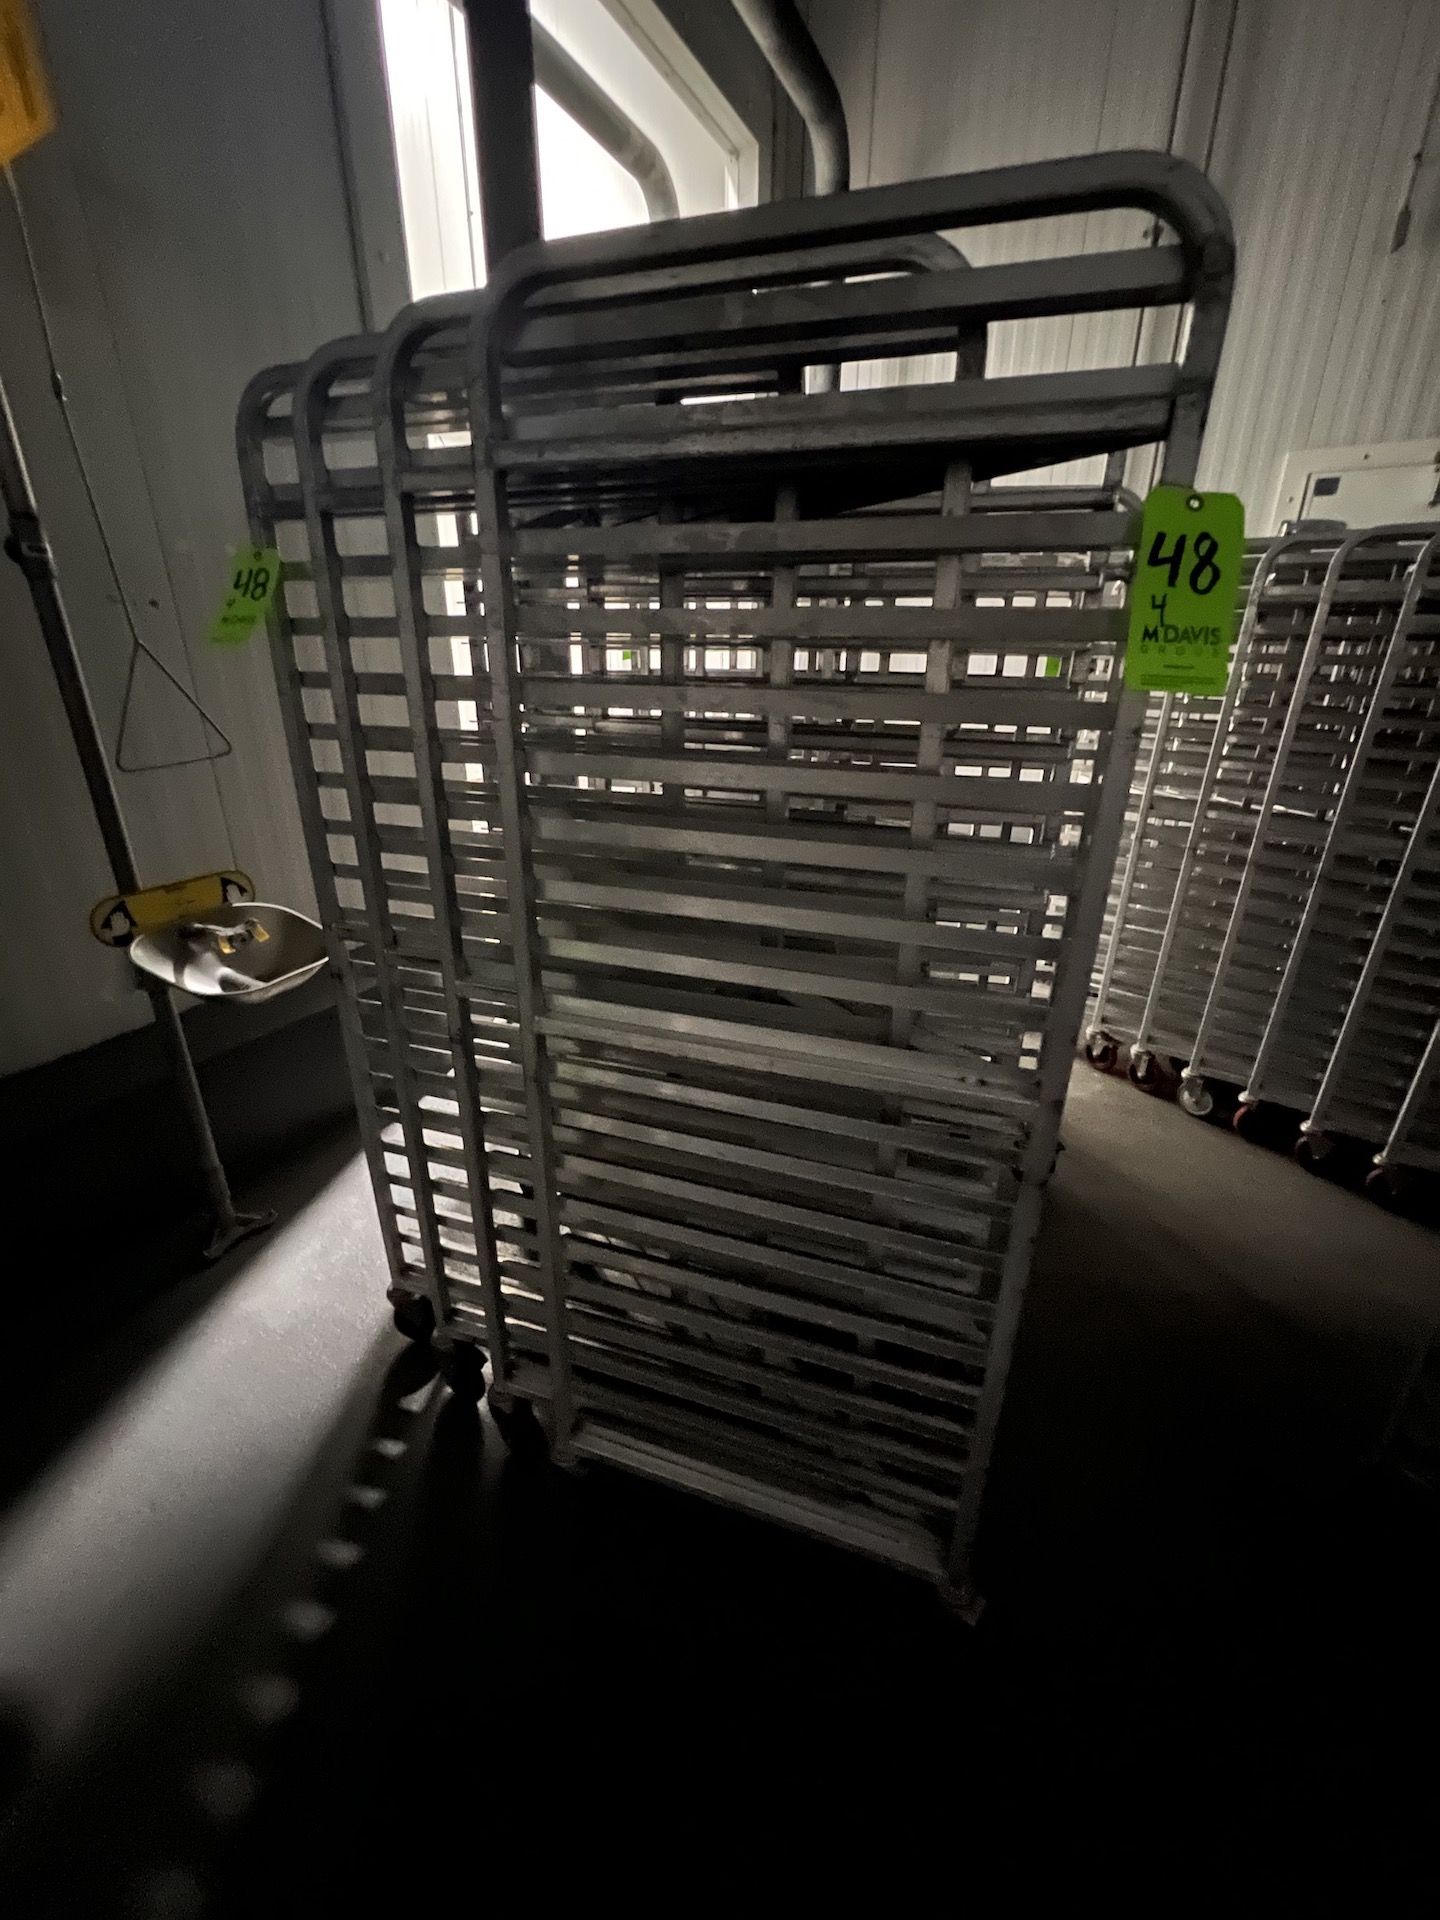 (4) NESTING BUN / SHEET PAN RACKS (RIGGING & SIMPLE LOADING FEE $40.00) (NOTE: DOES NOT INCLUDE